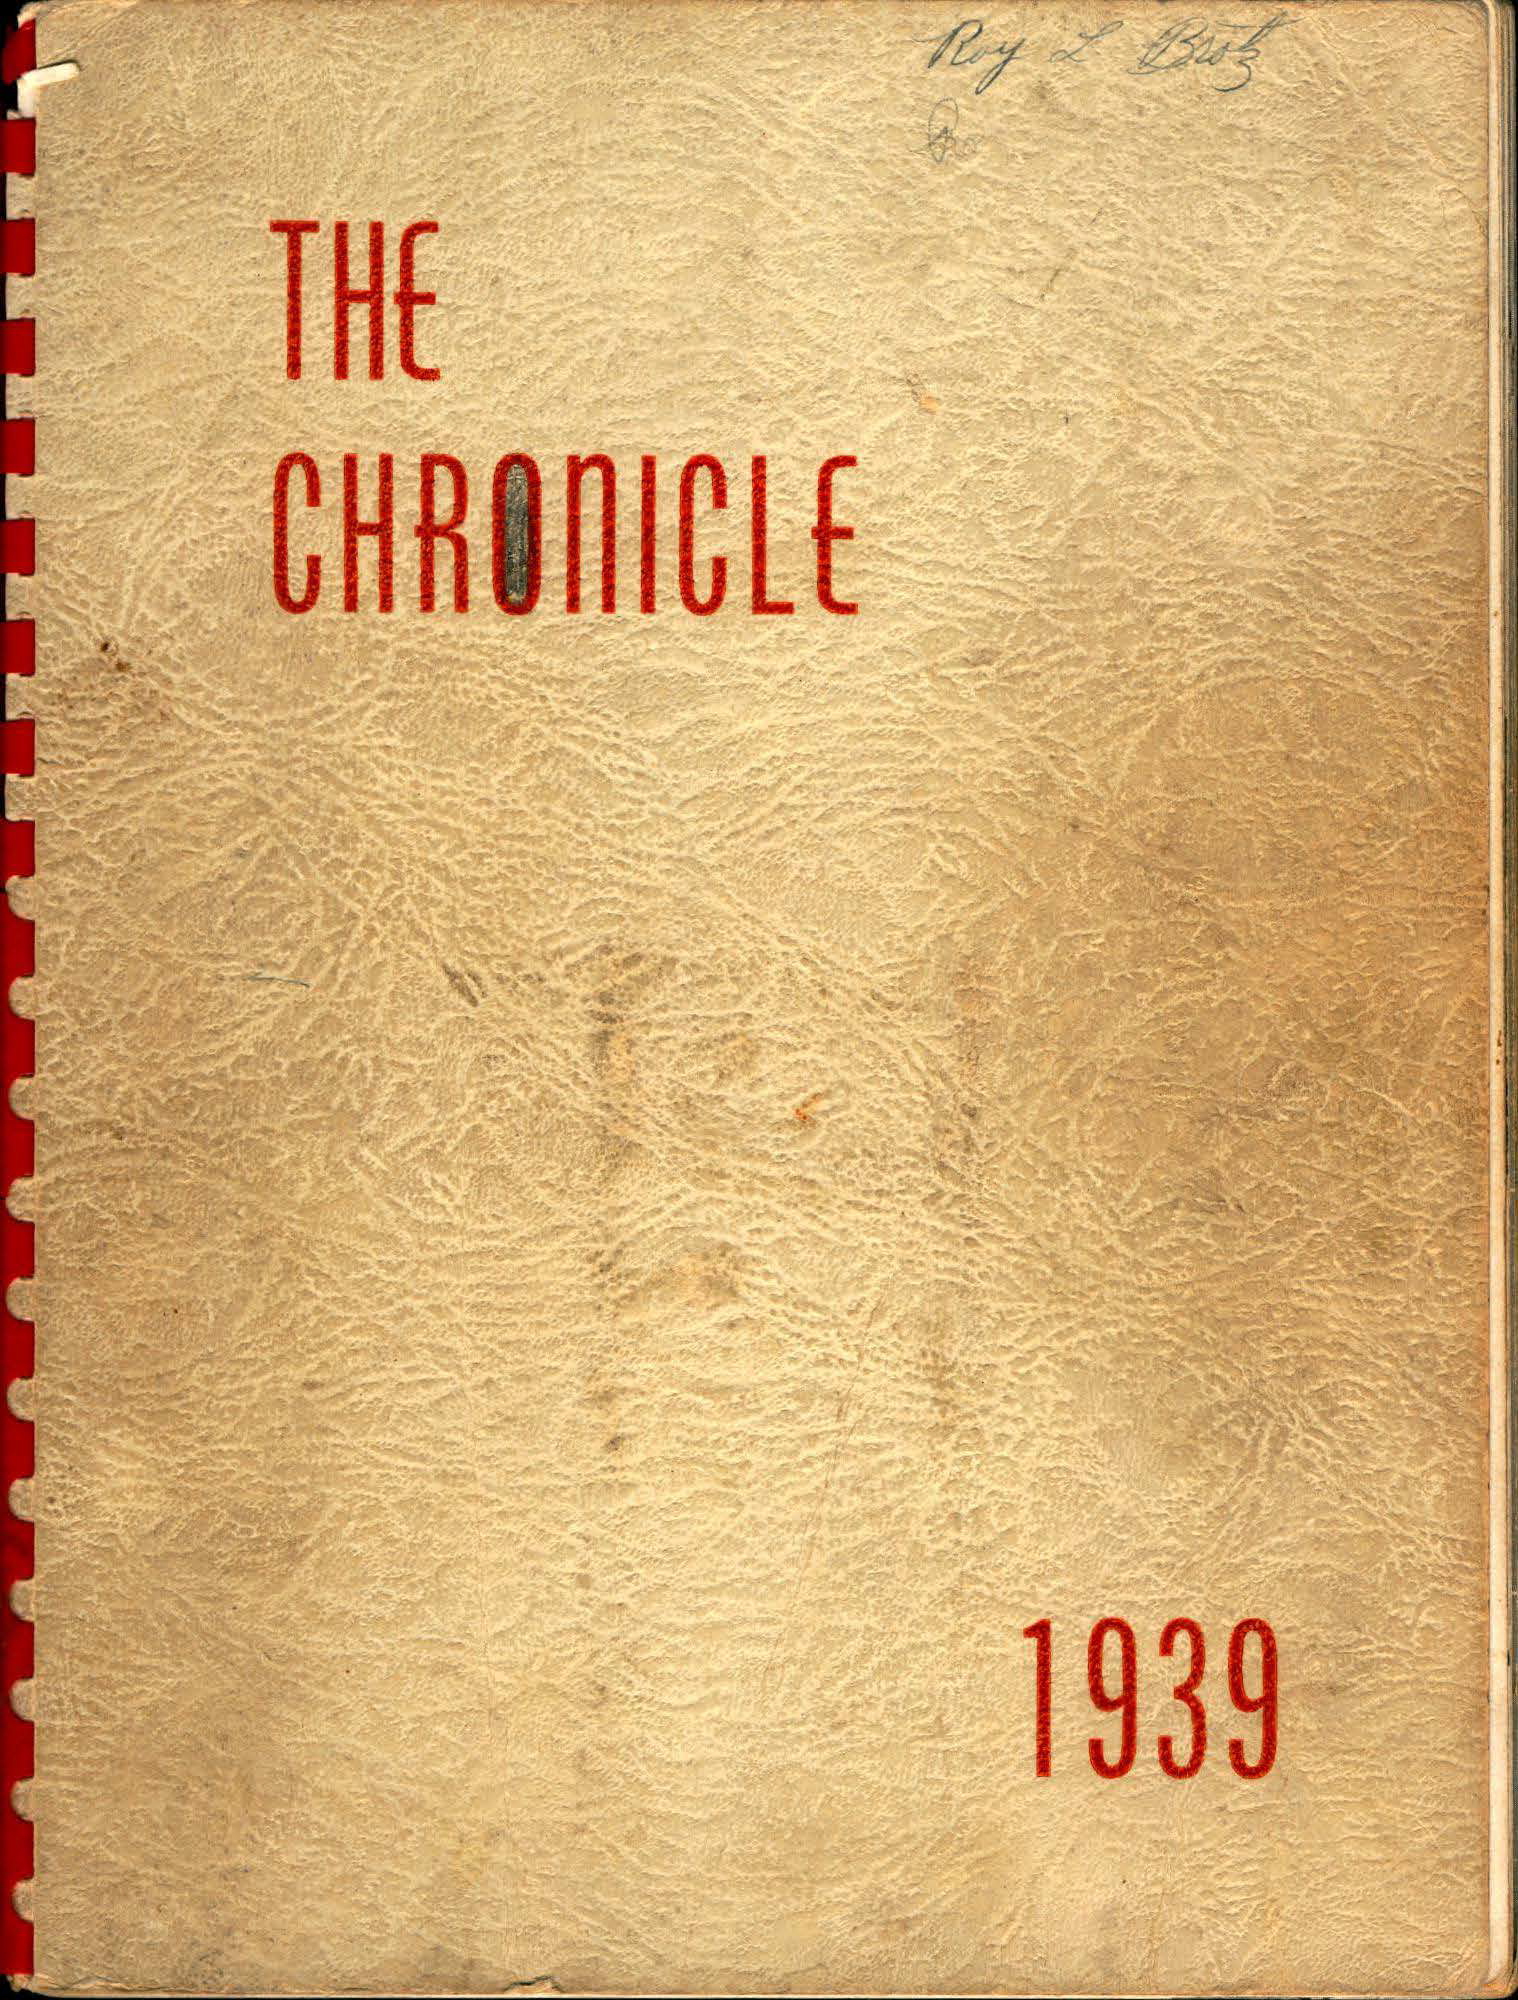 1939 Chelmsford High Yearbook 1